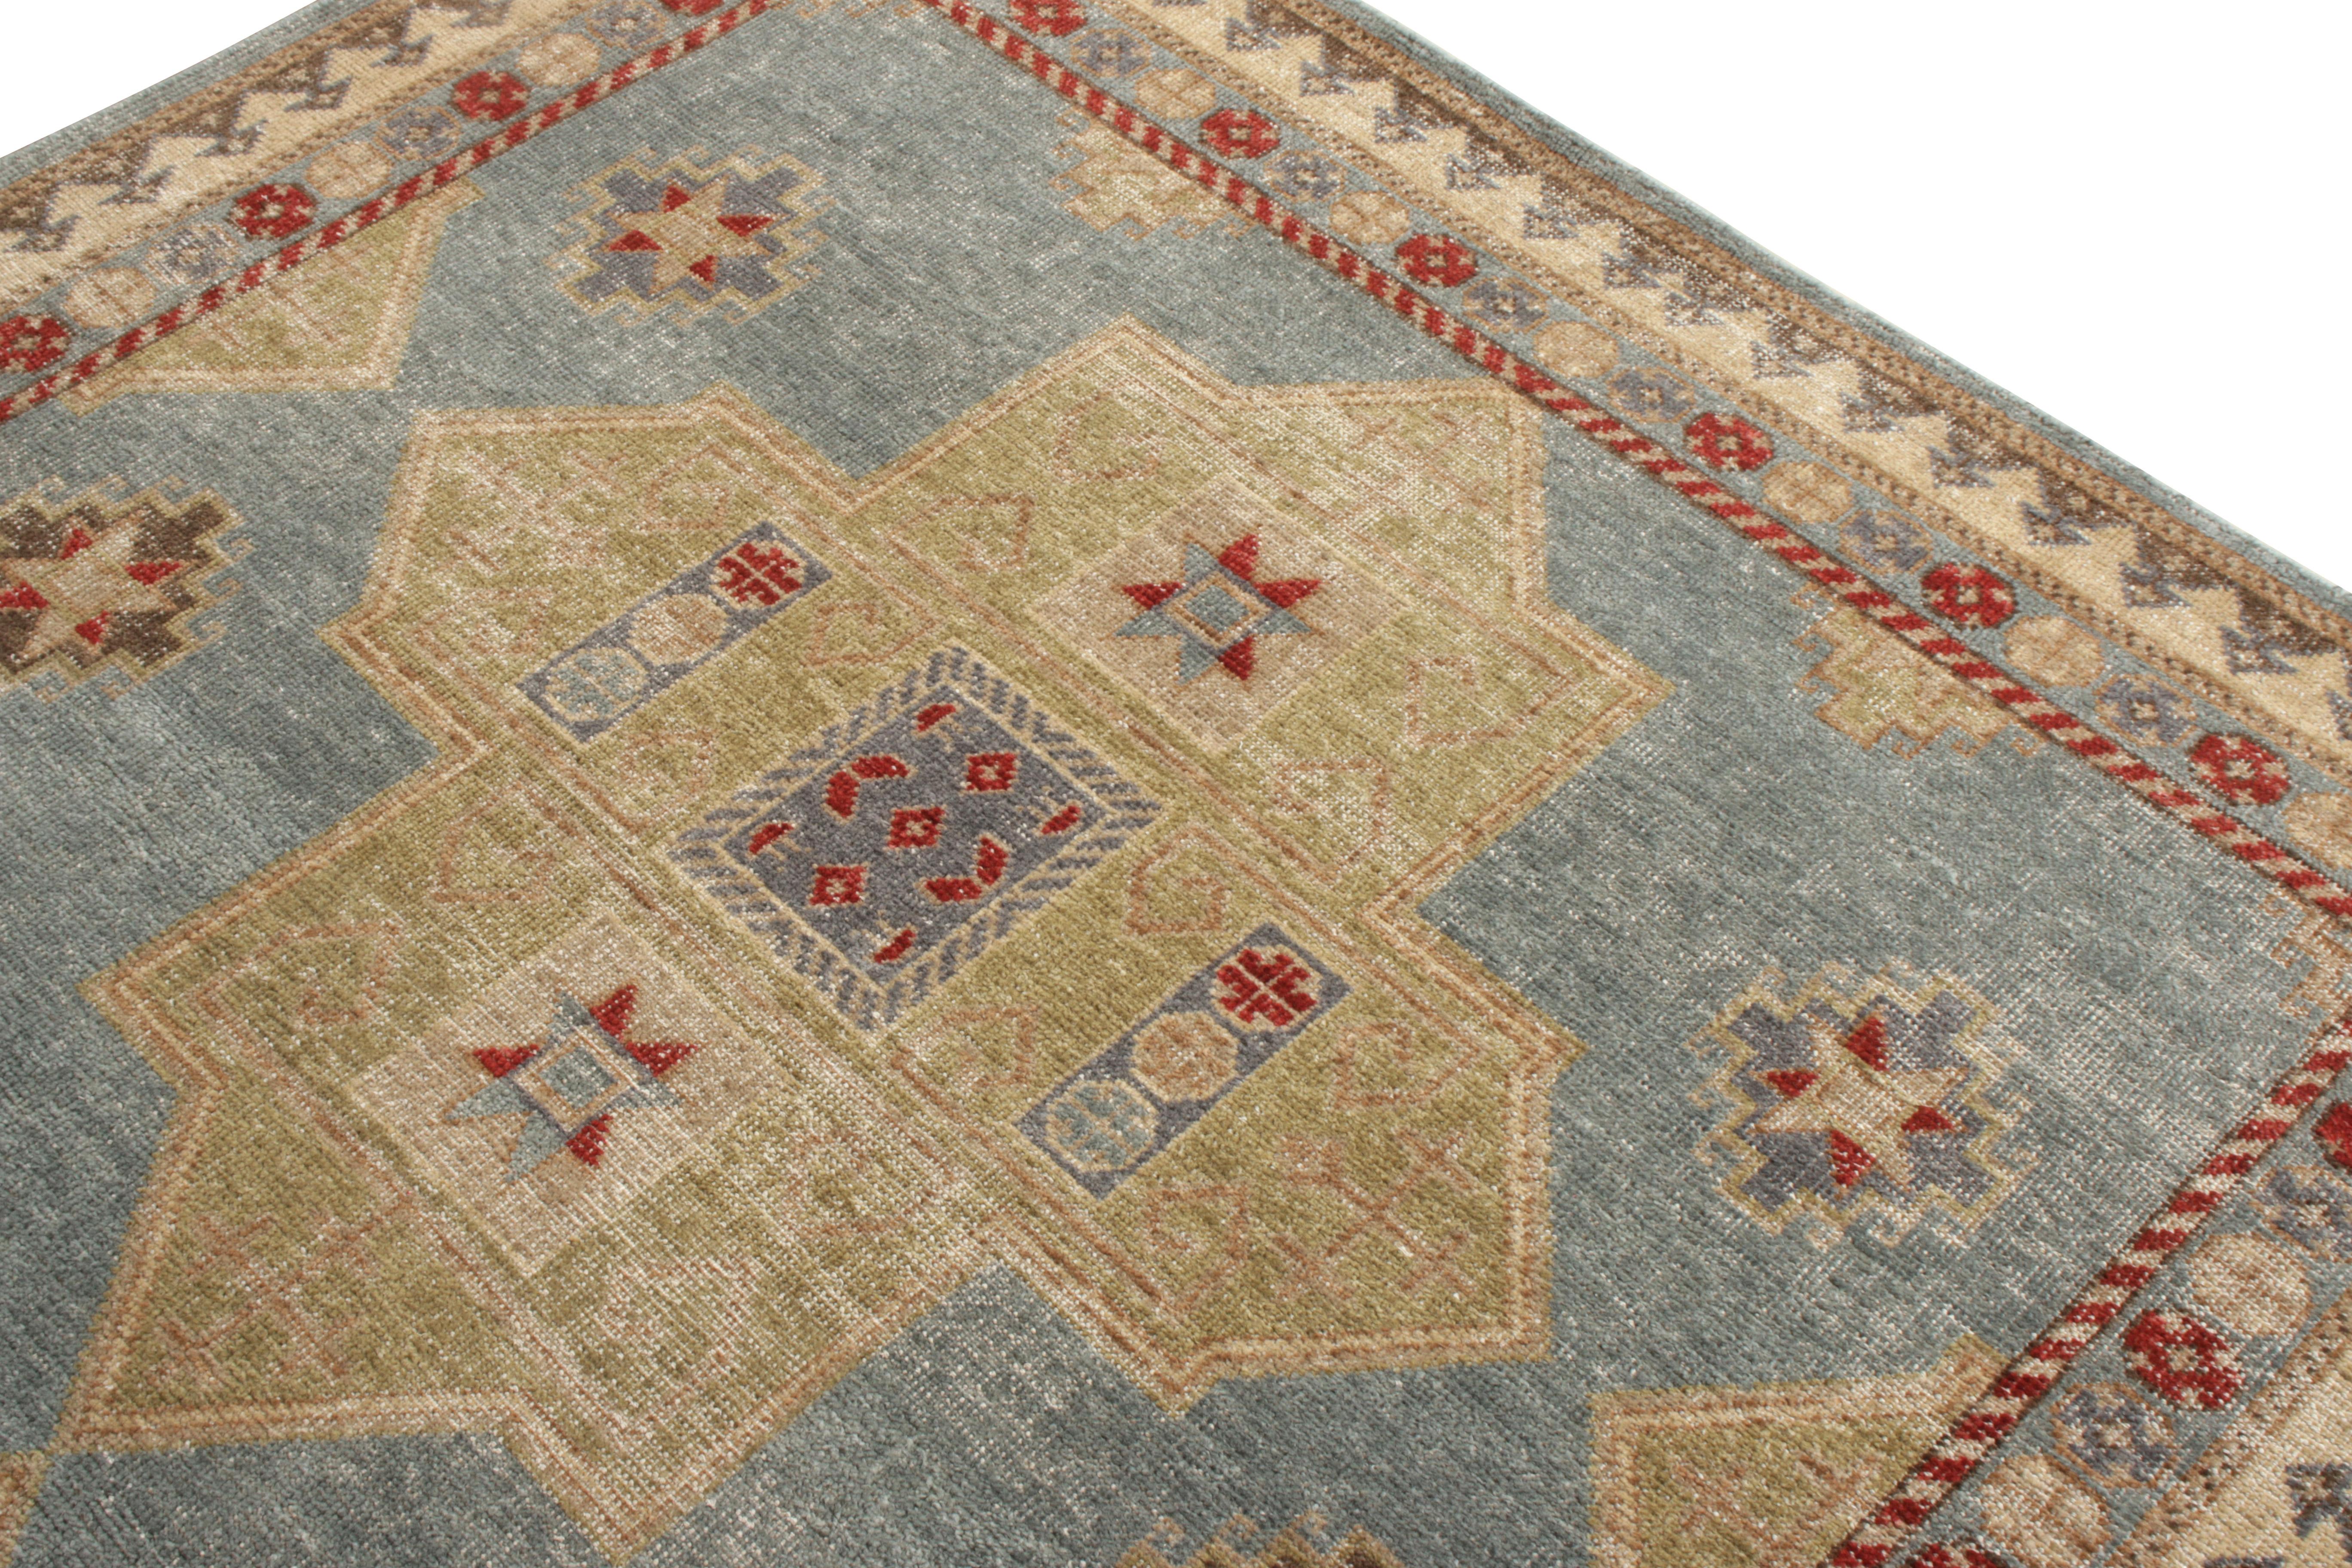 Hand-Knotted Rug & Kilim’s Distressed Classic Style Rug in Blue, Beige-Green Geometric Patter For Sale